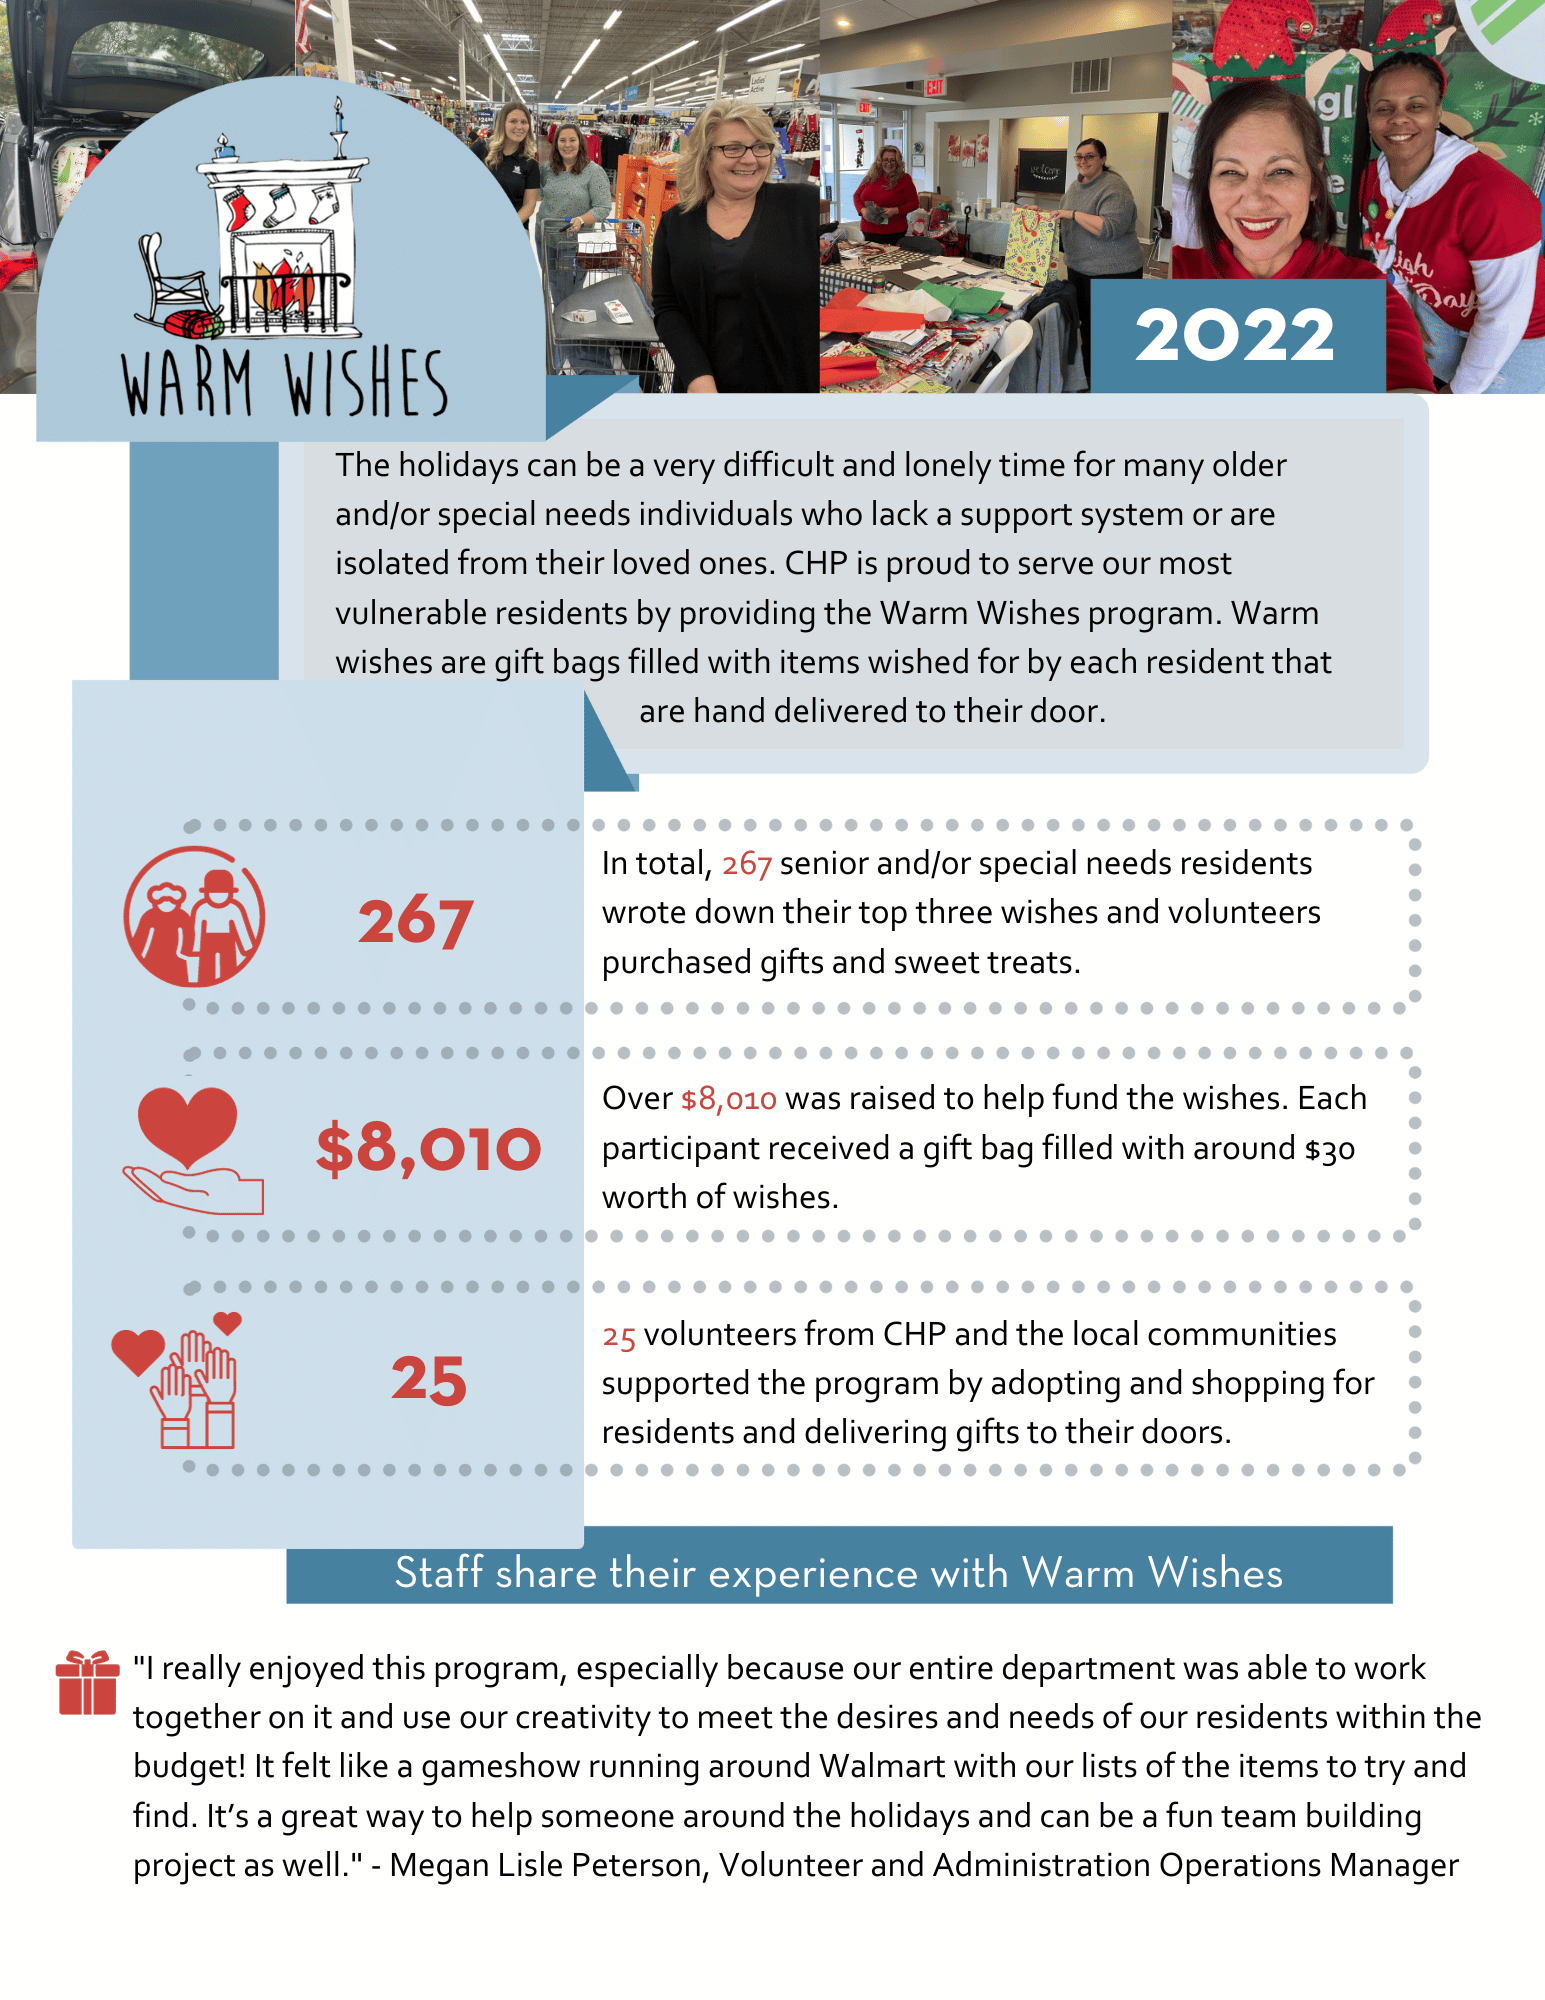 Warm Wishes 2022 infographic